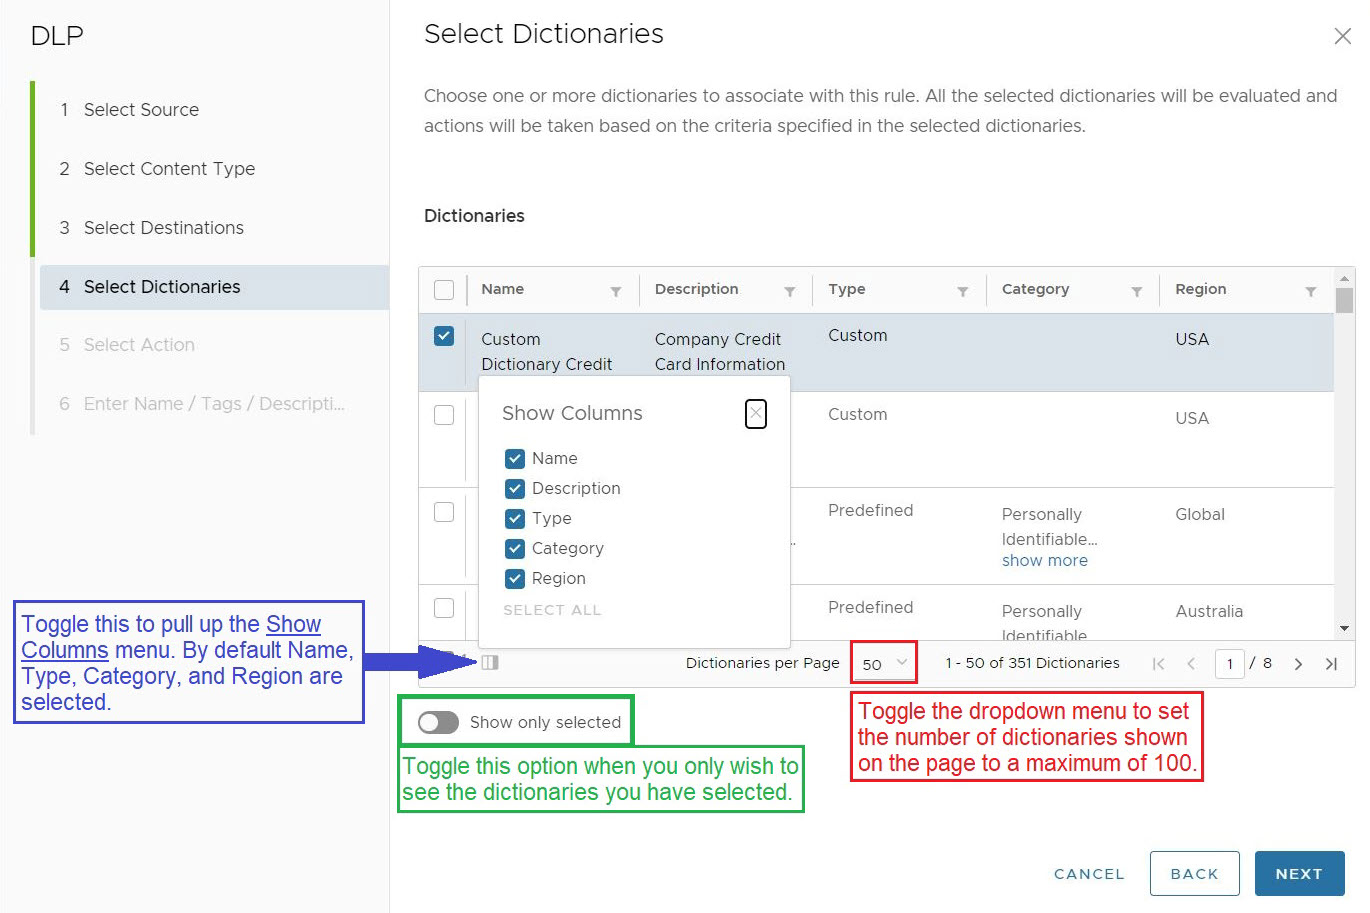 Select Dictionaries screen with explanations for several display configuration options.